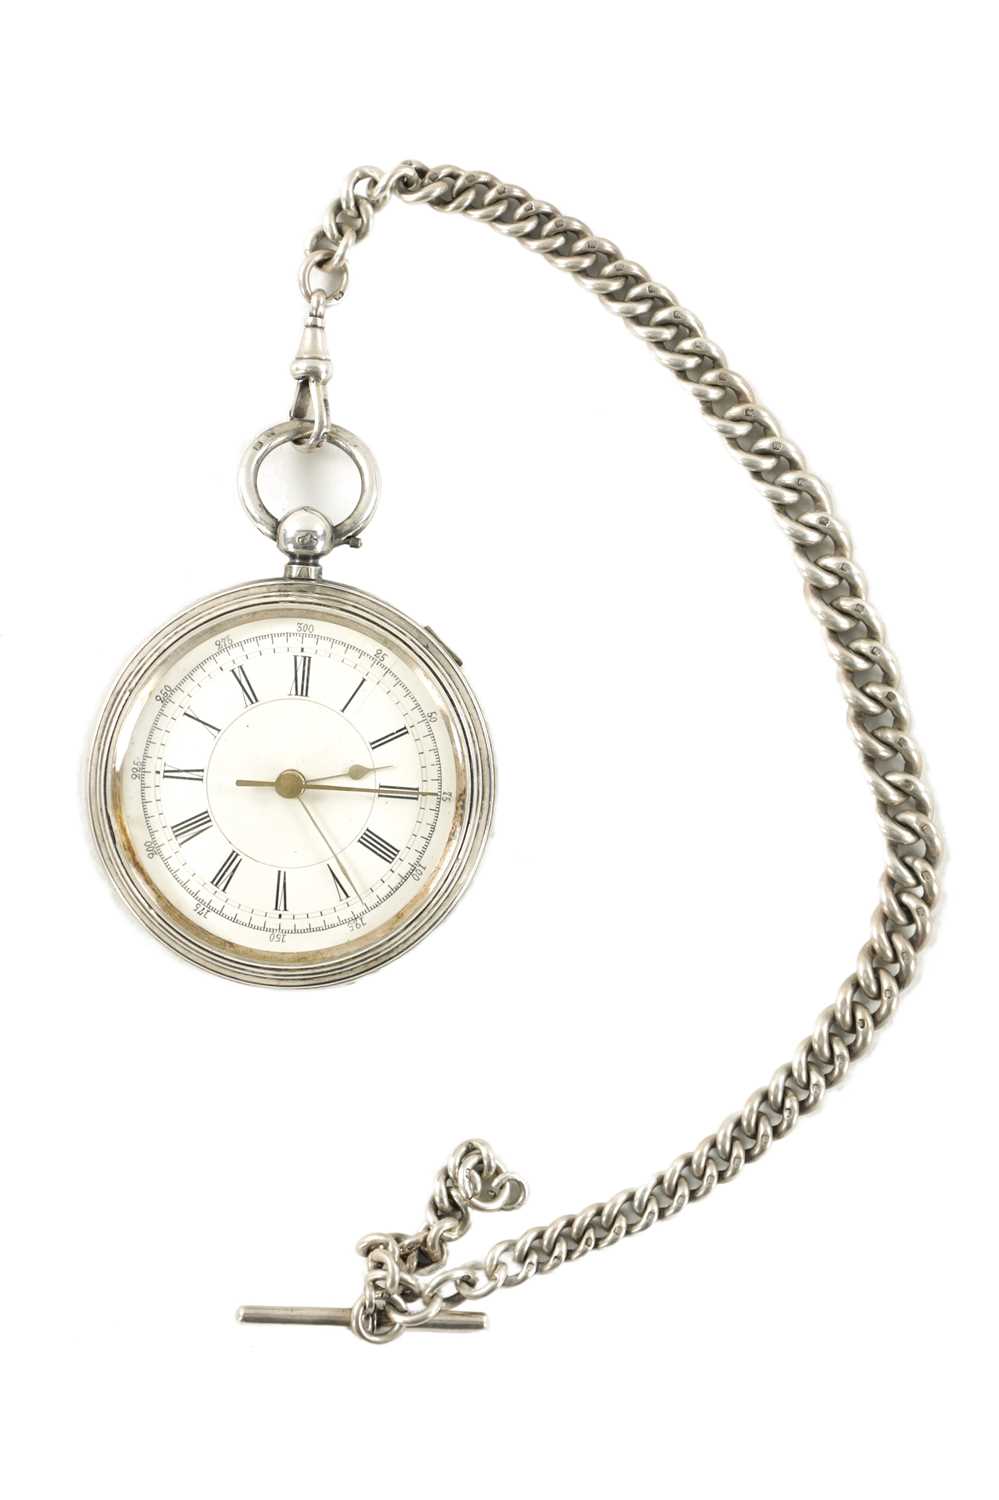 A LARGE LATE 19TH CENTURY DOCTORS SILVER POCKET WATCH